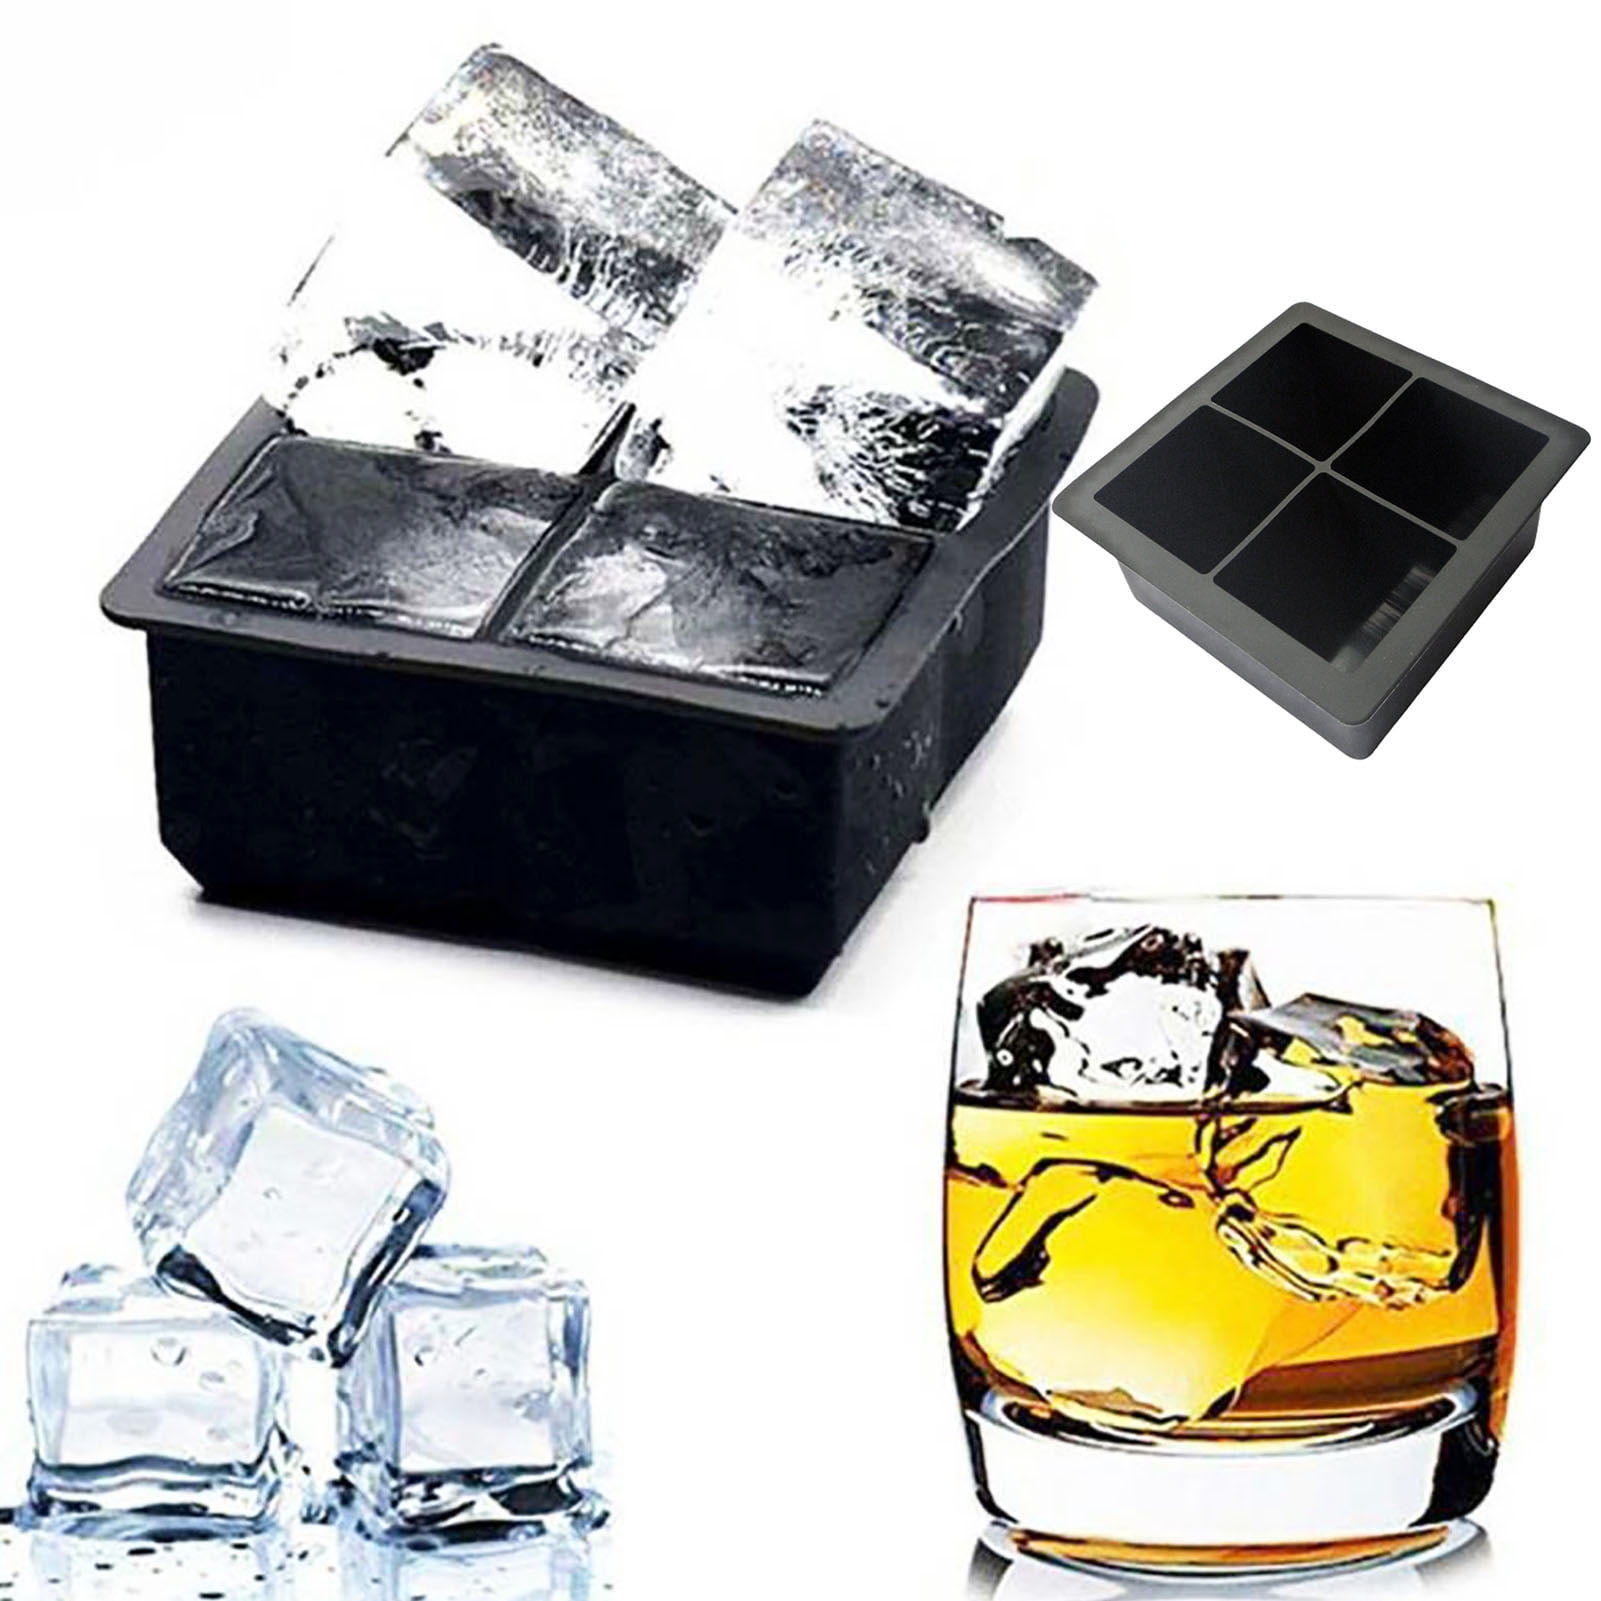 Kootek Large Ice Cube Trays for Cocktails 4 Pack - Silicone Ice Cube Mold for Whiskey Easy Release Reusable Molds with Removable Lids for Making 24